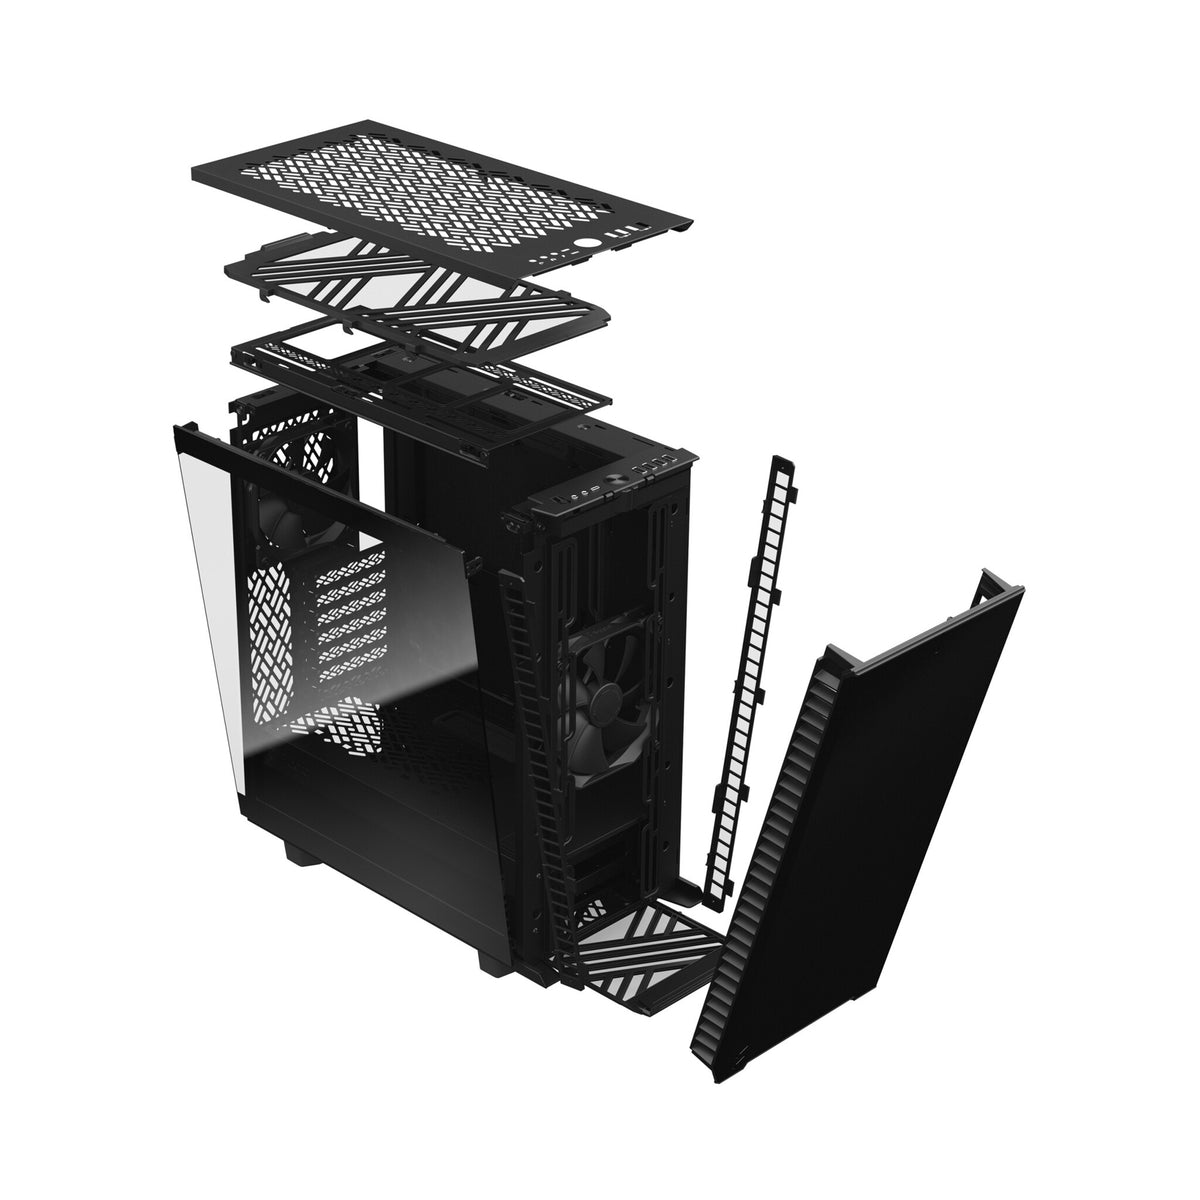 Fractal Design Define 7 Compact - ATX Mid Tower Case in Black